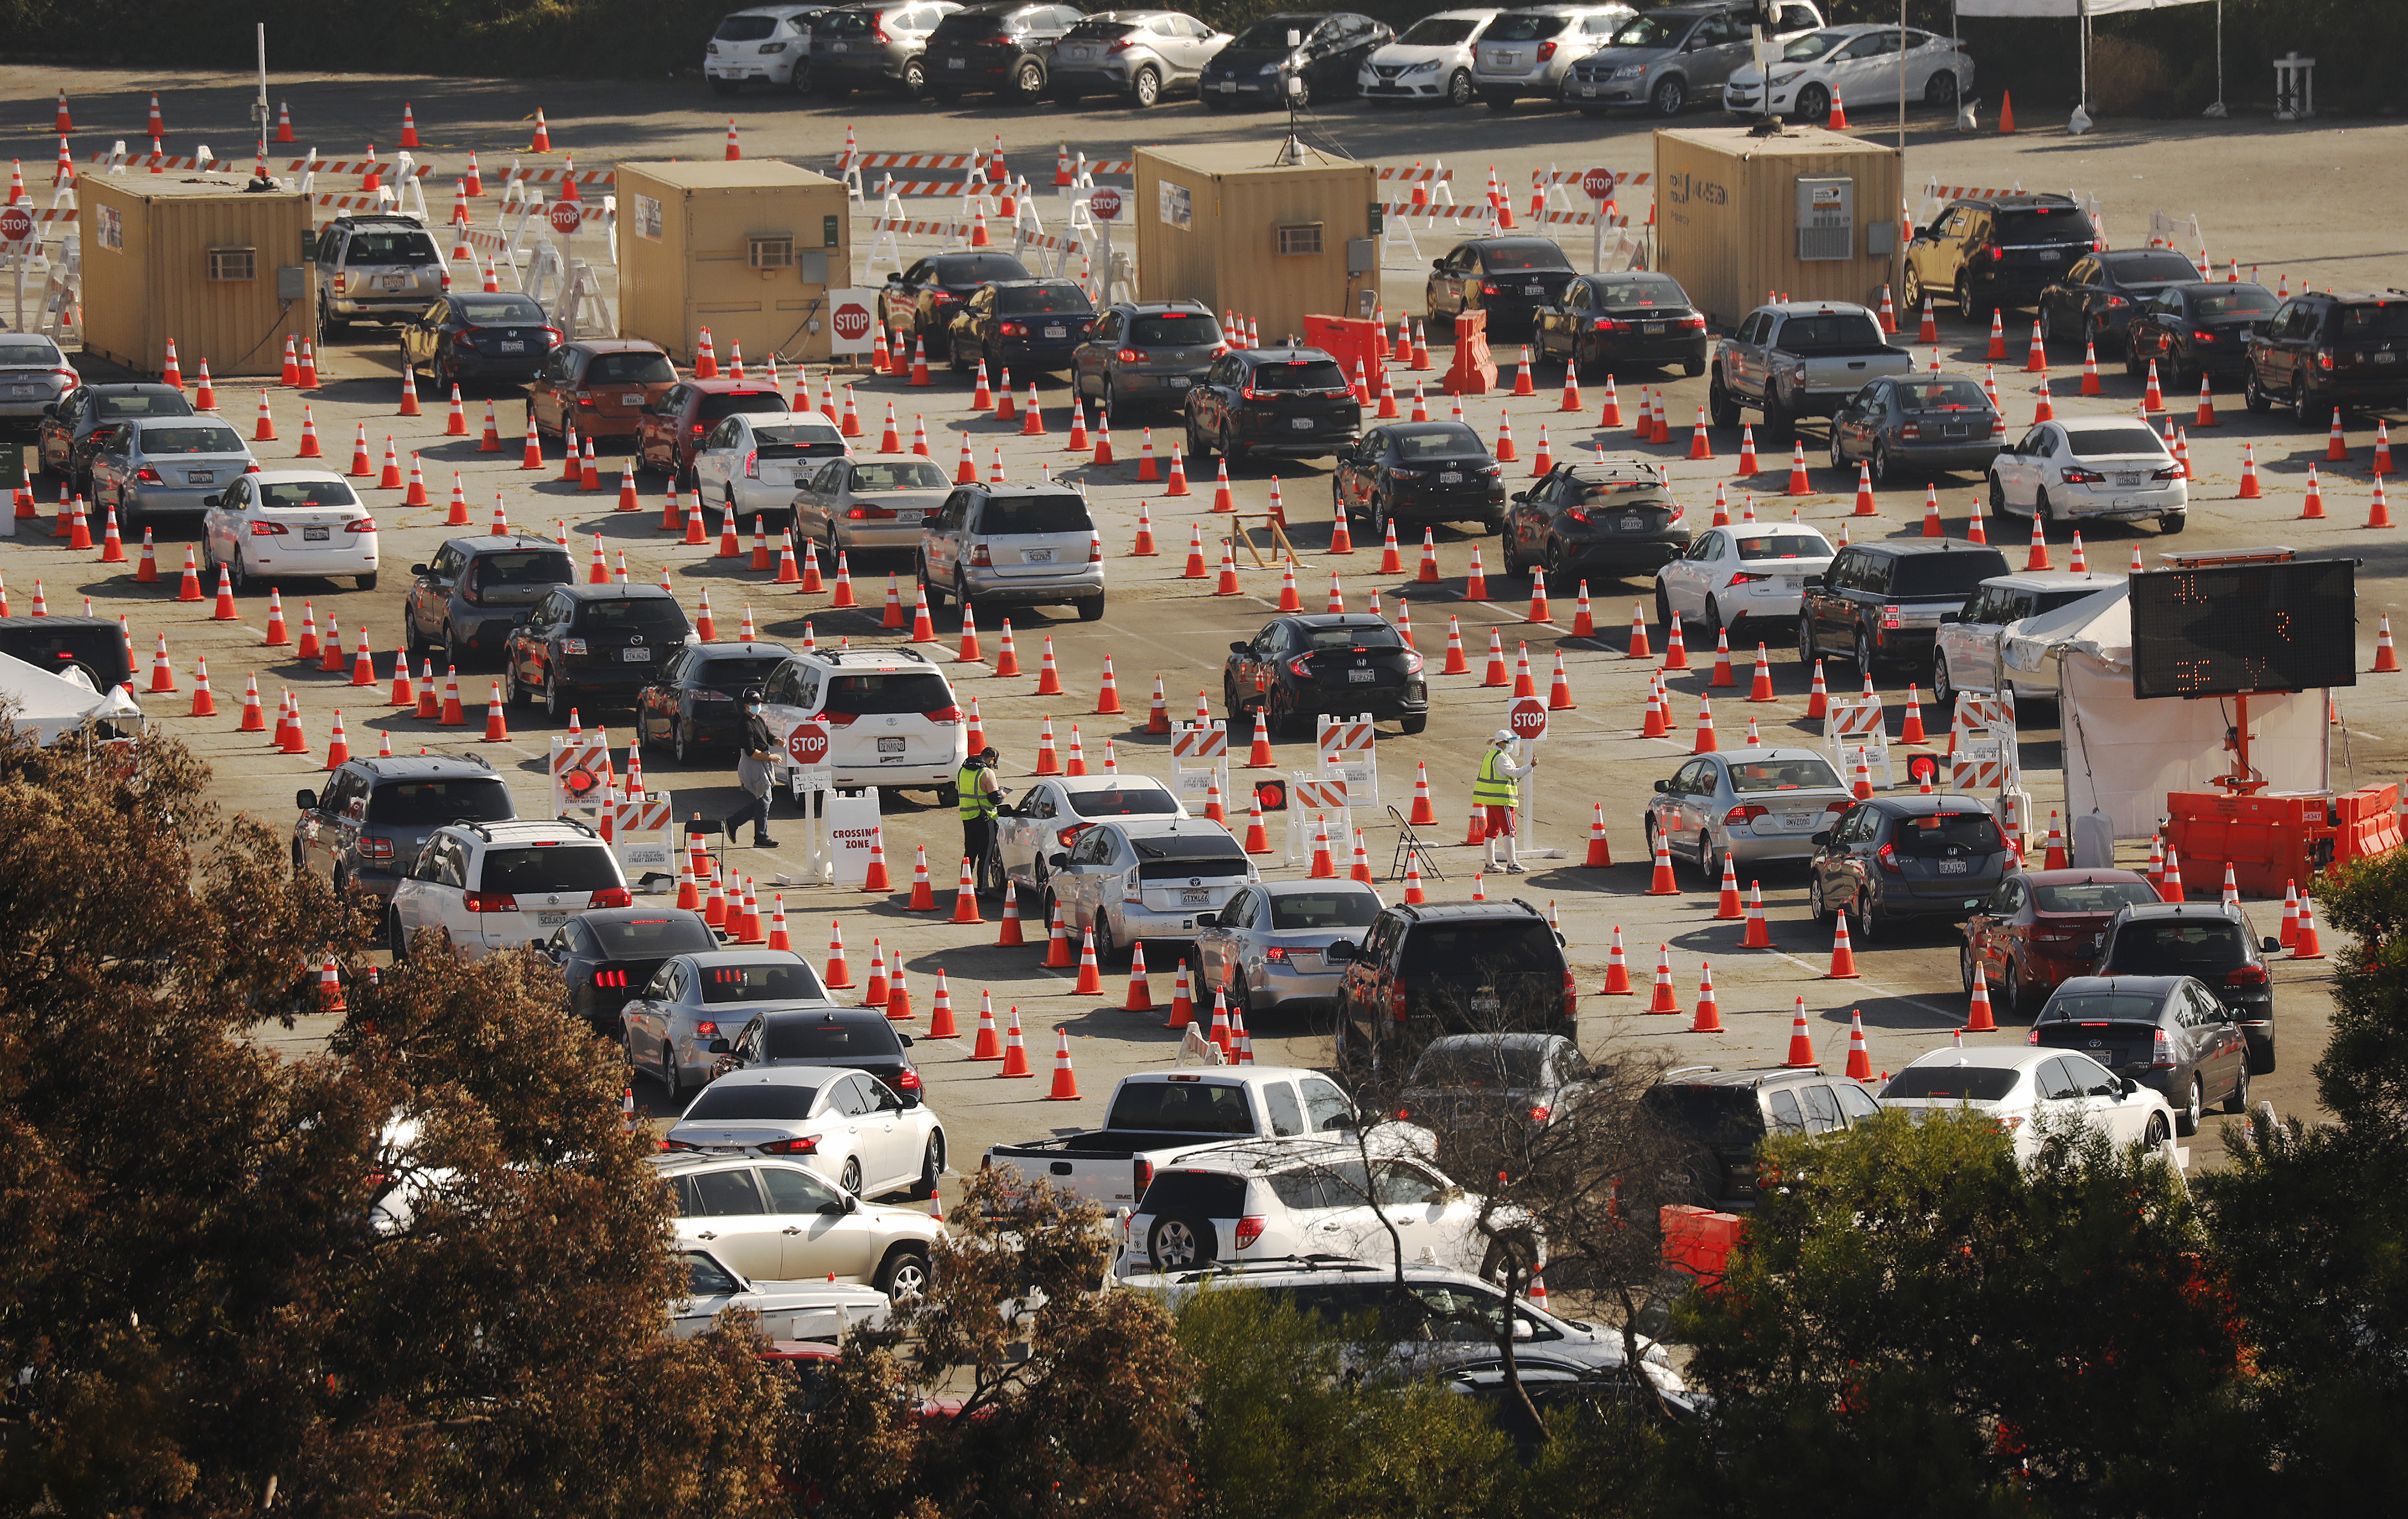 The Dodger Stadium COVID-19 testing site, which is the largest in the U.S., will reopen today after a weekend closure for restructuring to alleviate traffic in the area. The site has administered 1 million COVID-19 tests since May, according to Mayor Eric